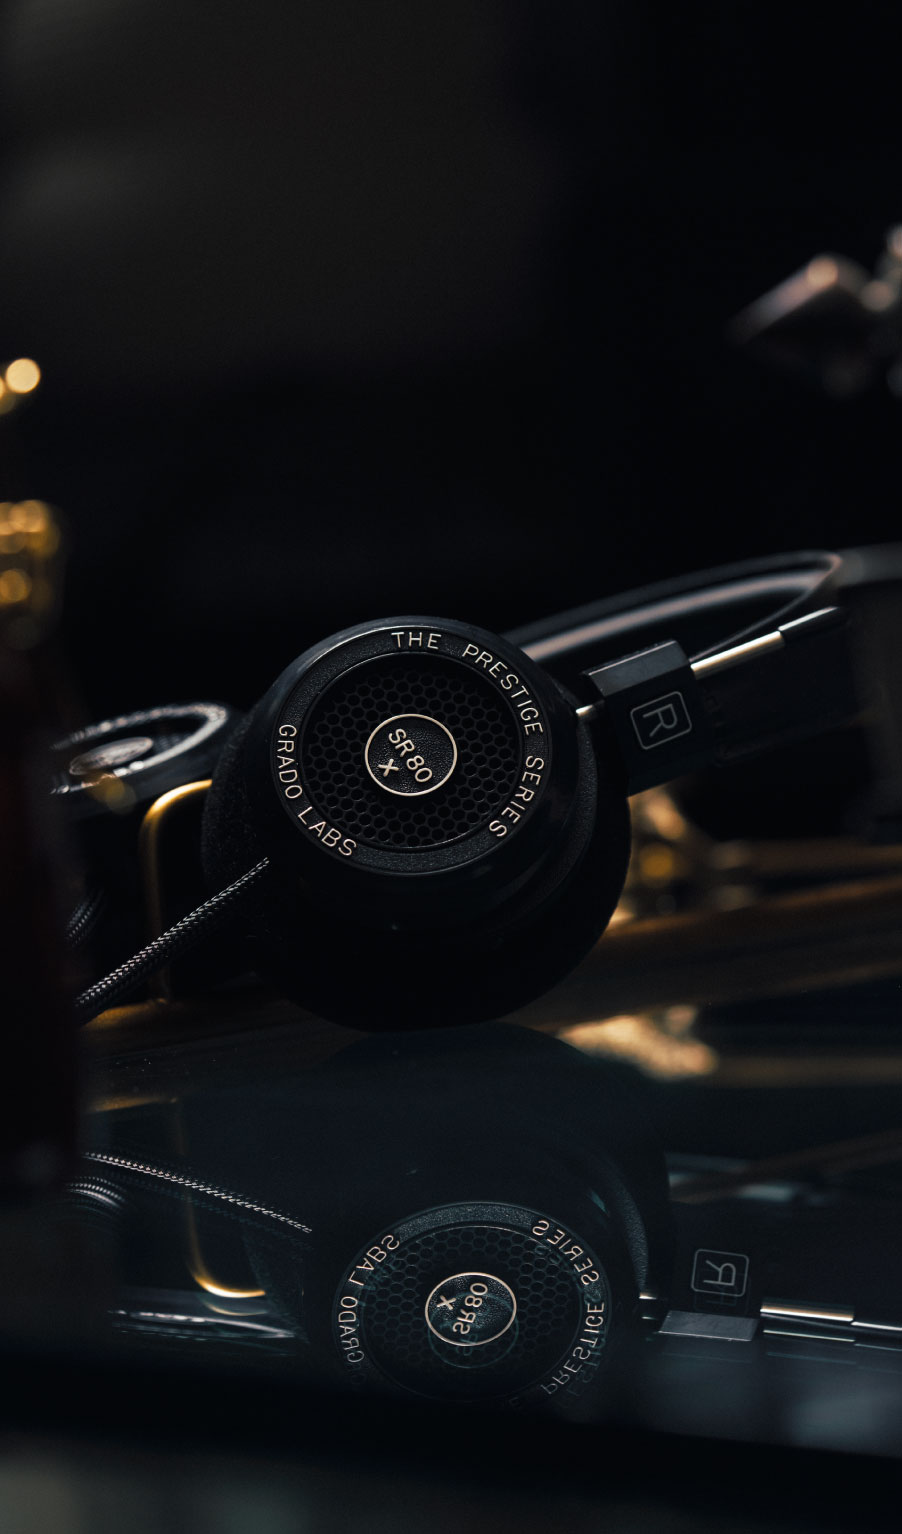 Photo of SR80x on reflective black table with blurred yellow lights in the background